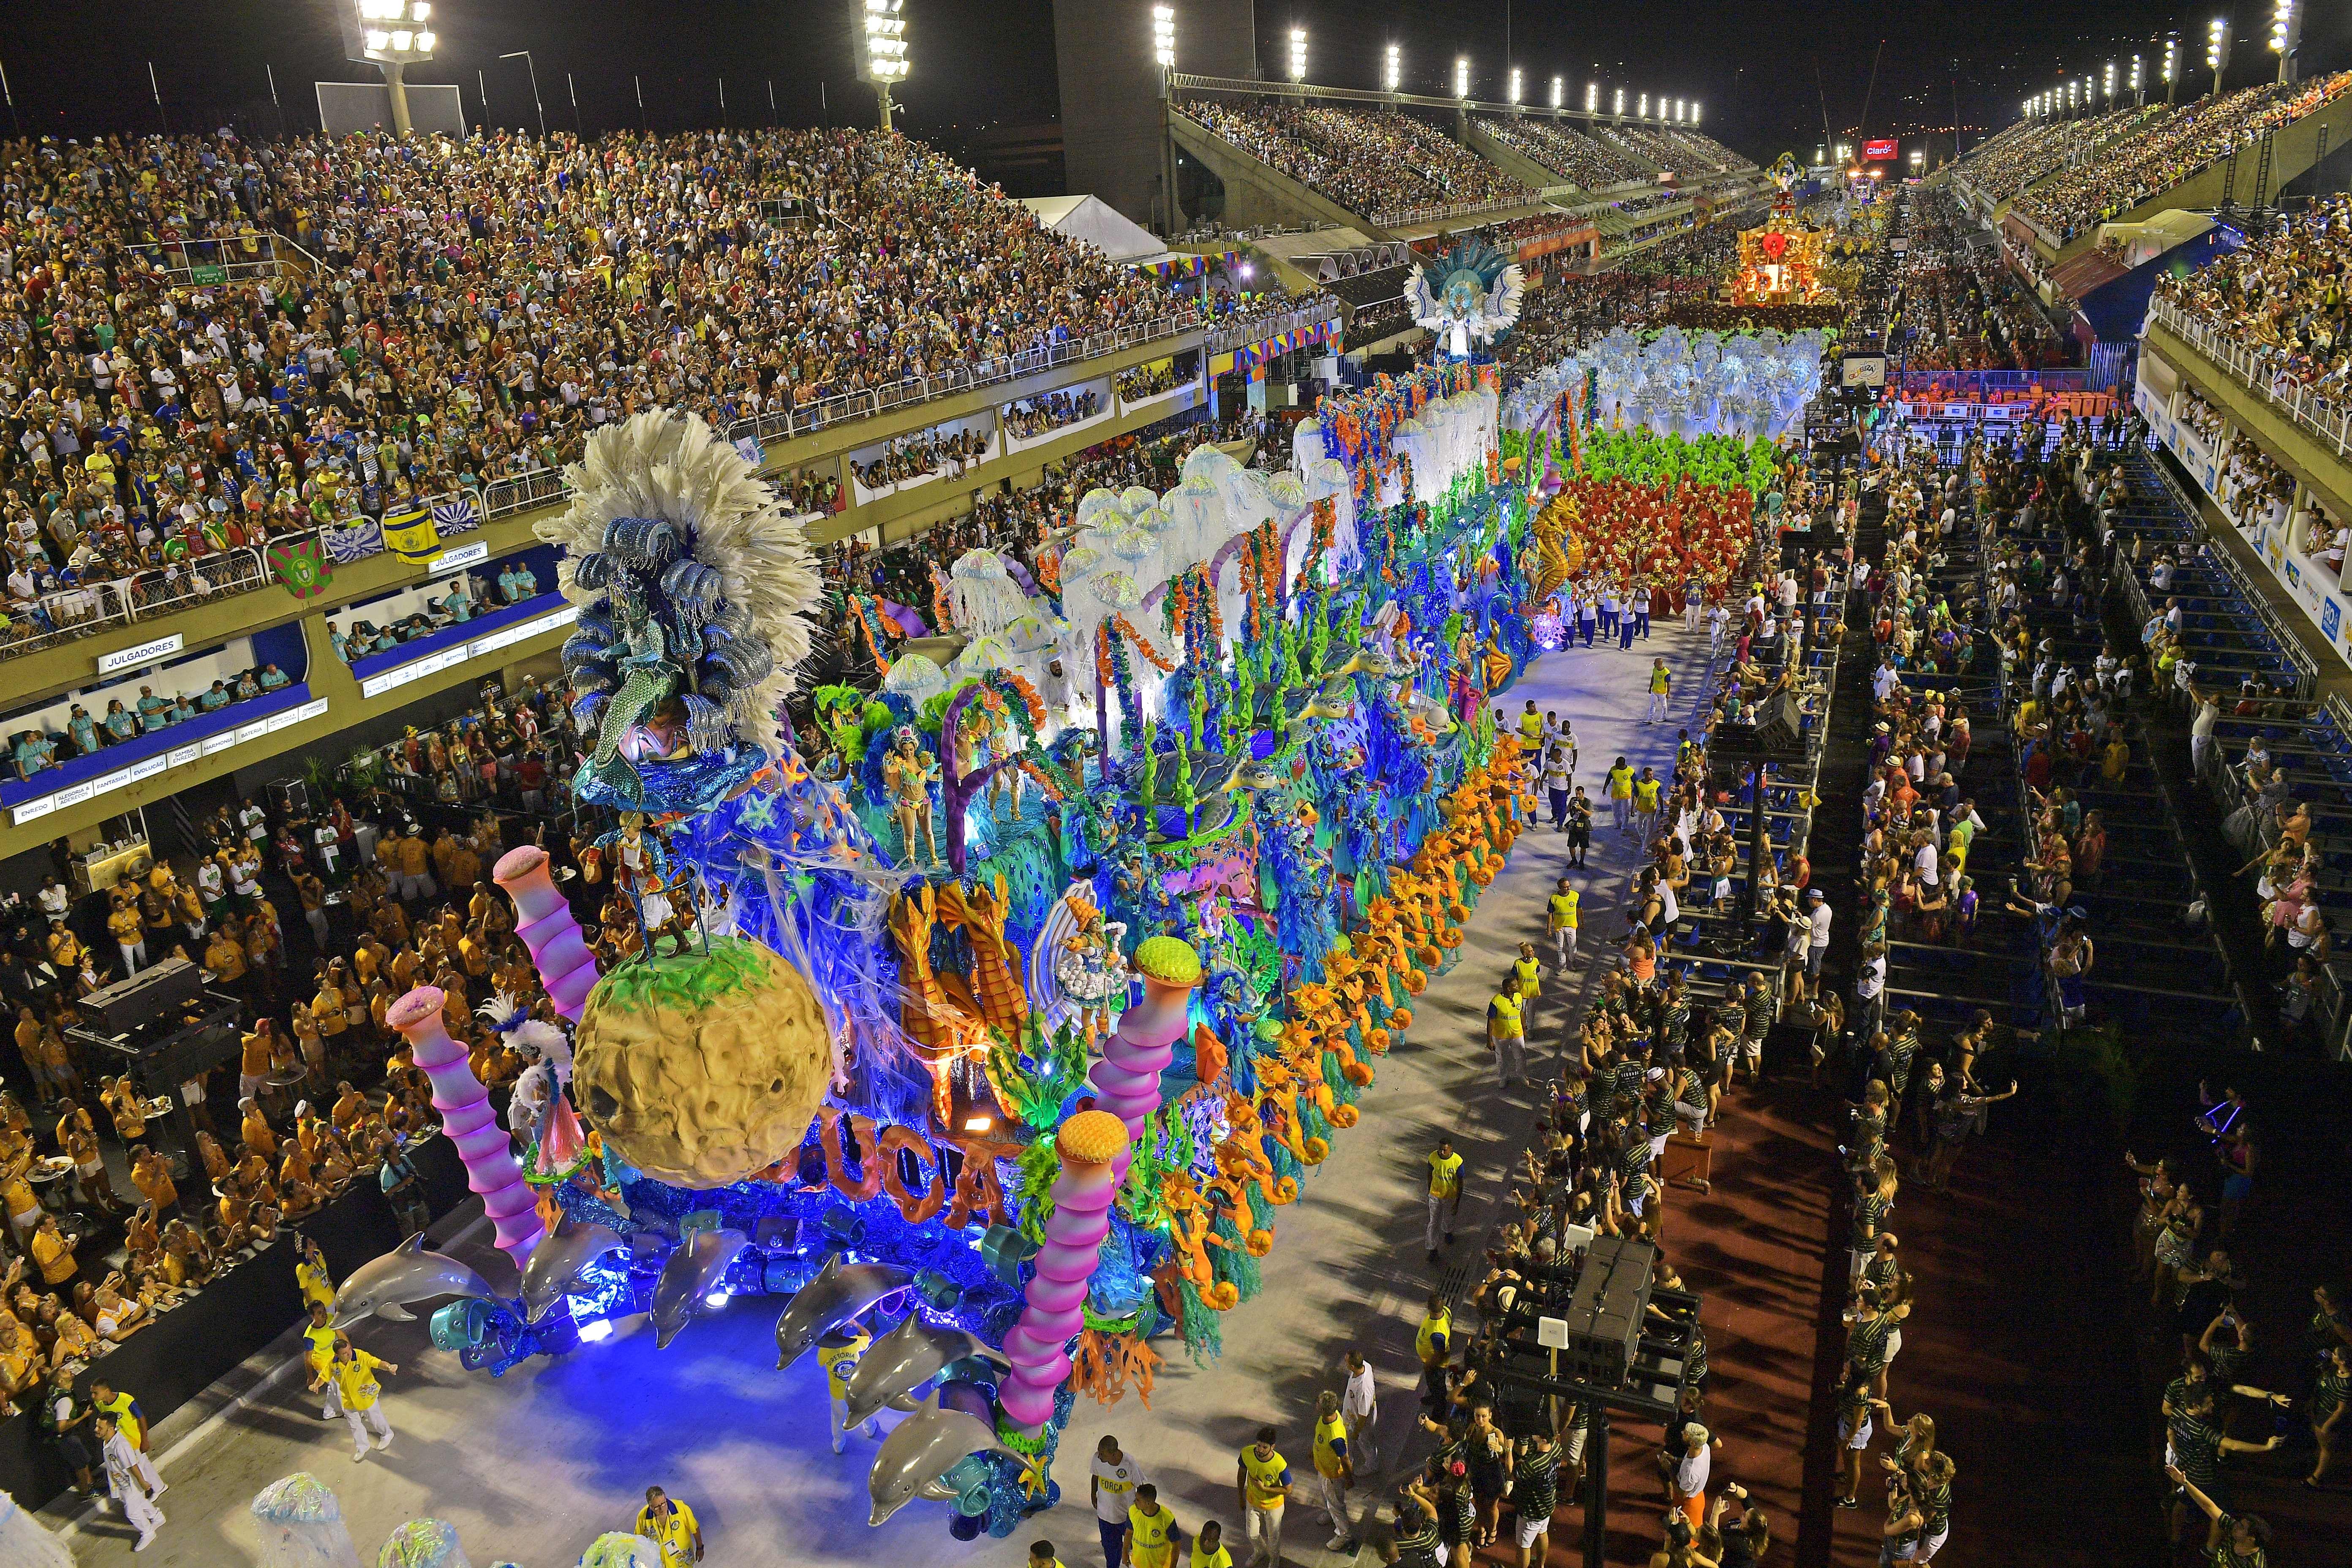 Things to Know About Rio de Janeiro's Carnival